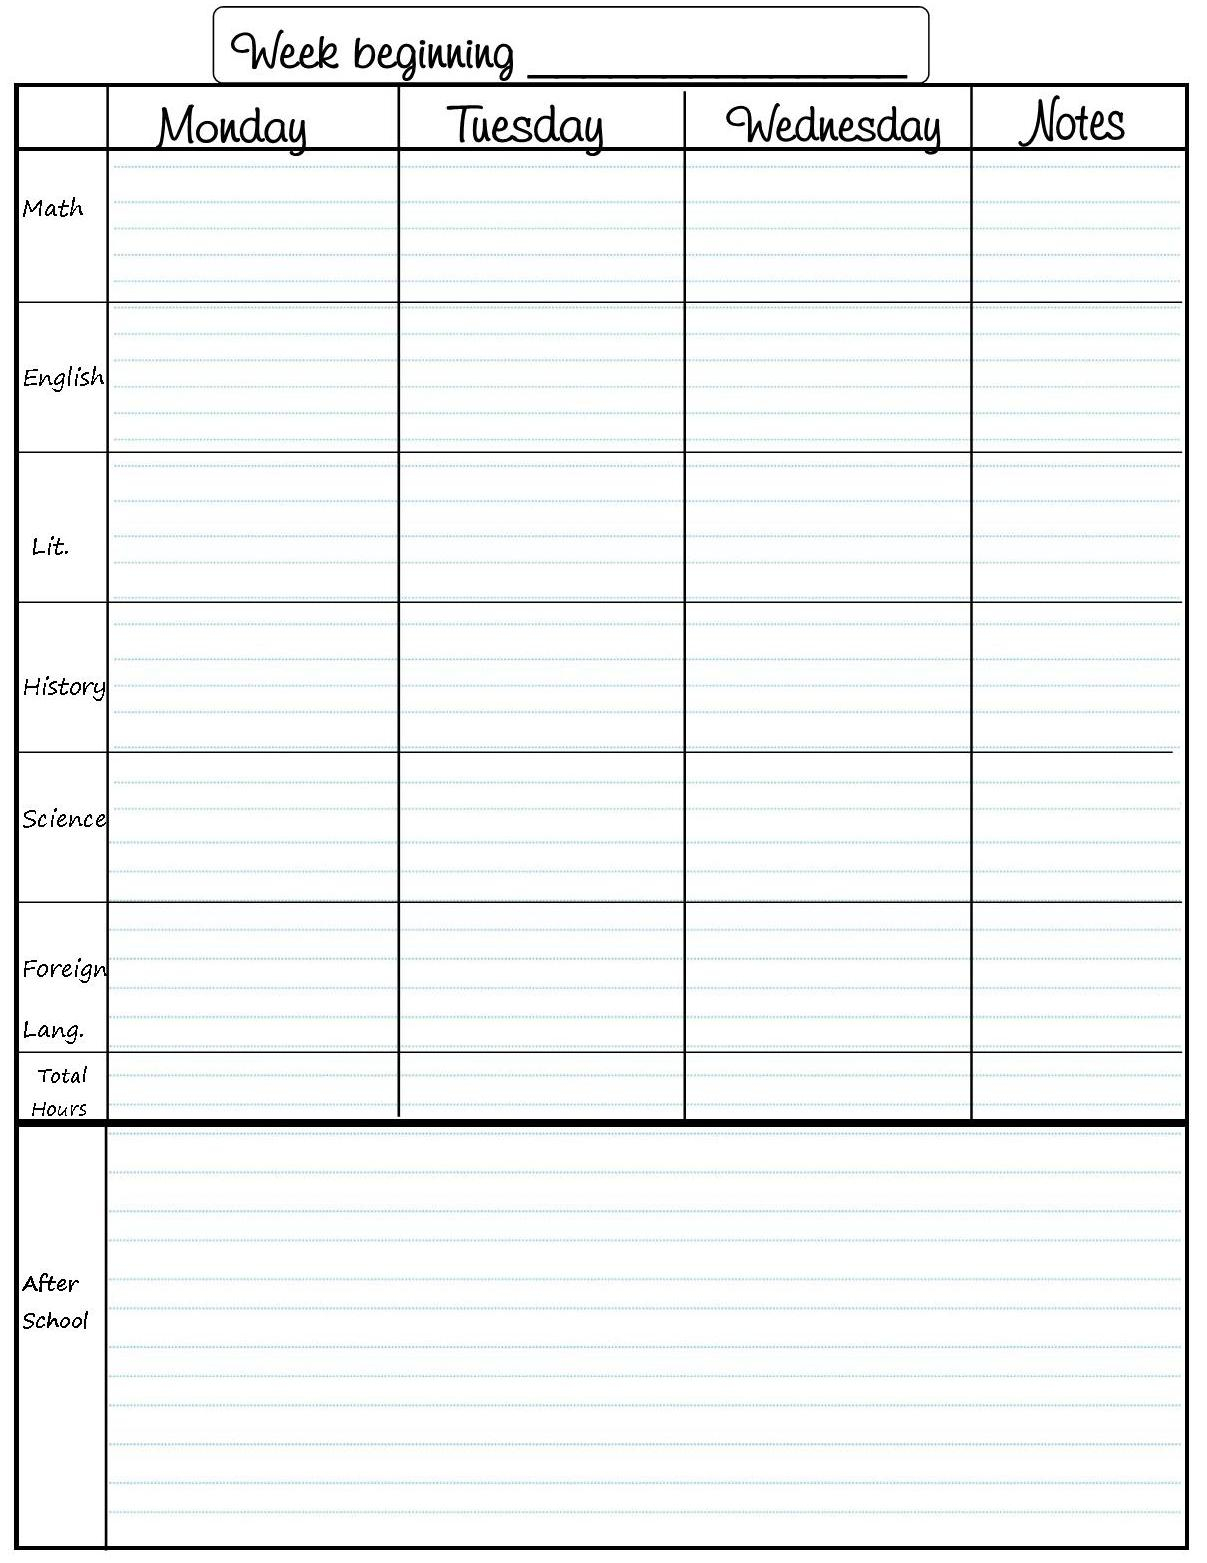 Student Planner Template Free Printable | Printable Planner Template - Free Printable Student Planner 2017